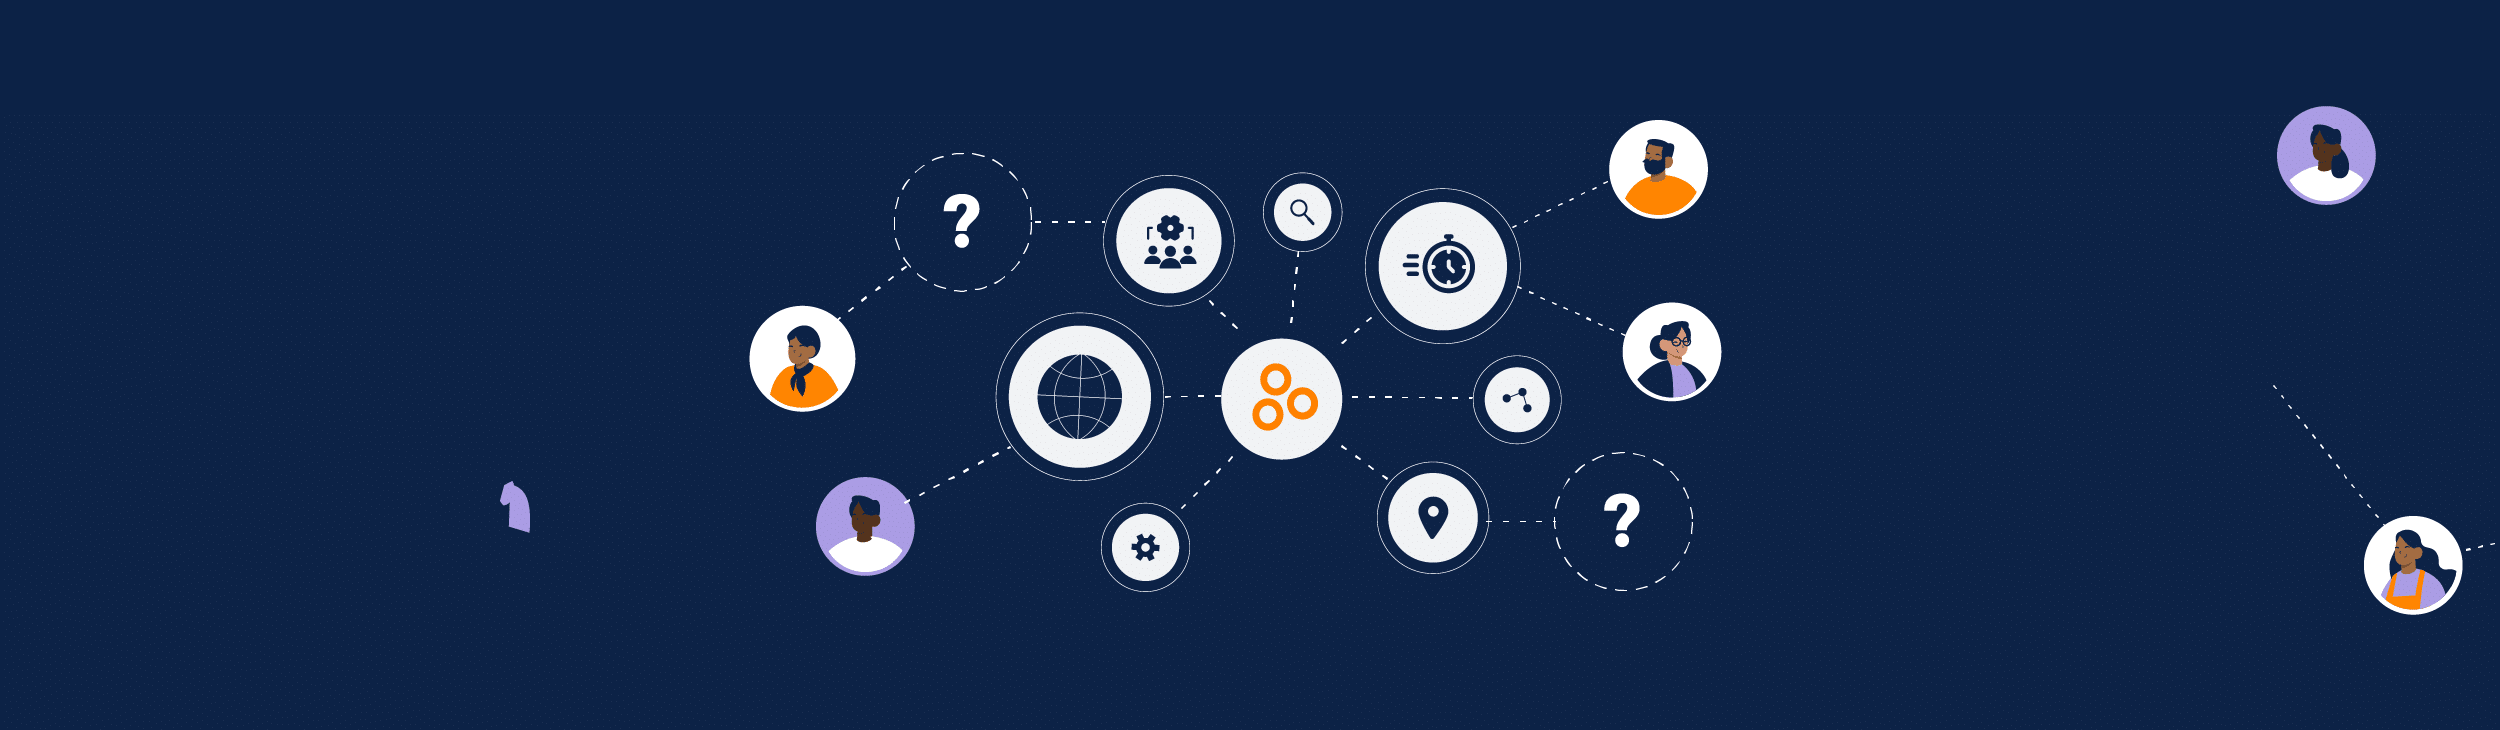 Vector image to represent users getting answers to their questions in the Hyperproof platform